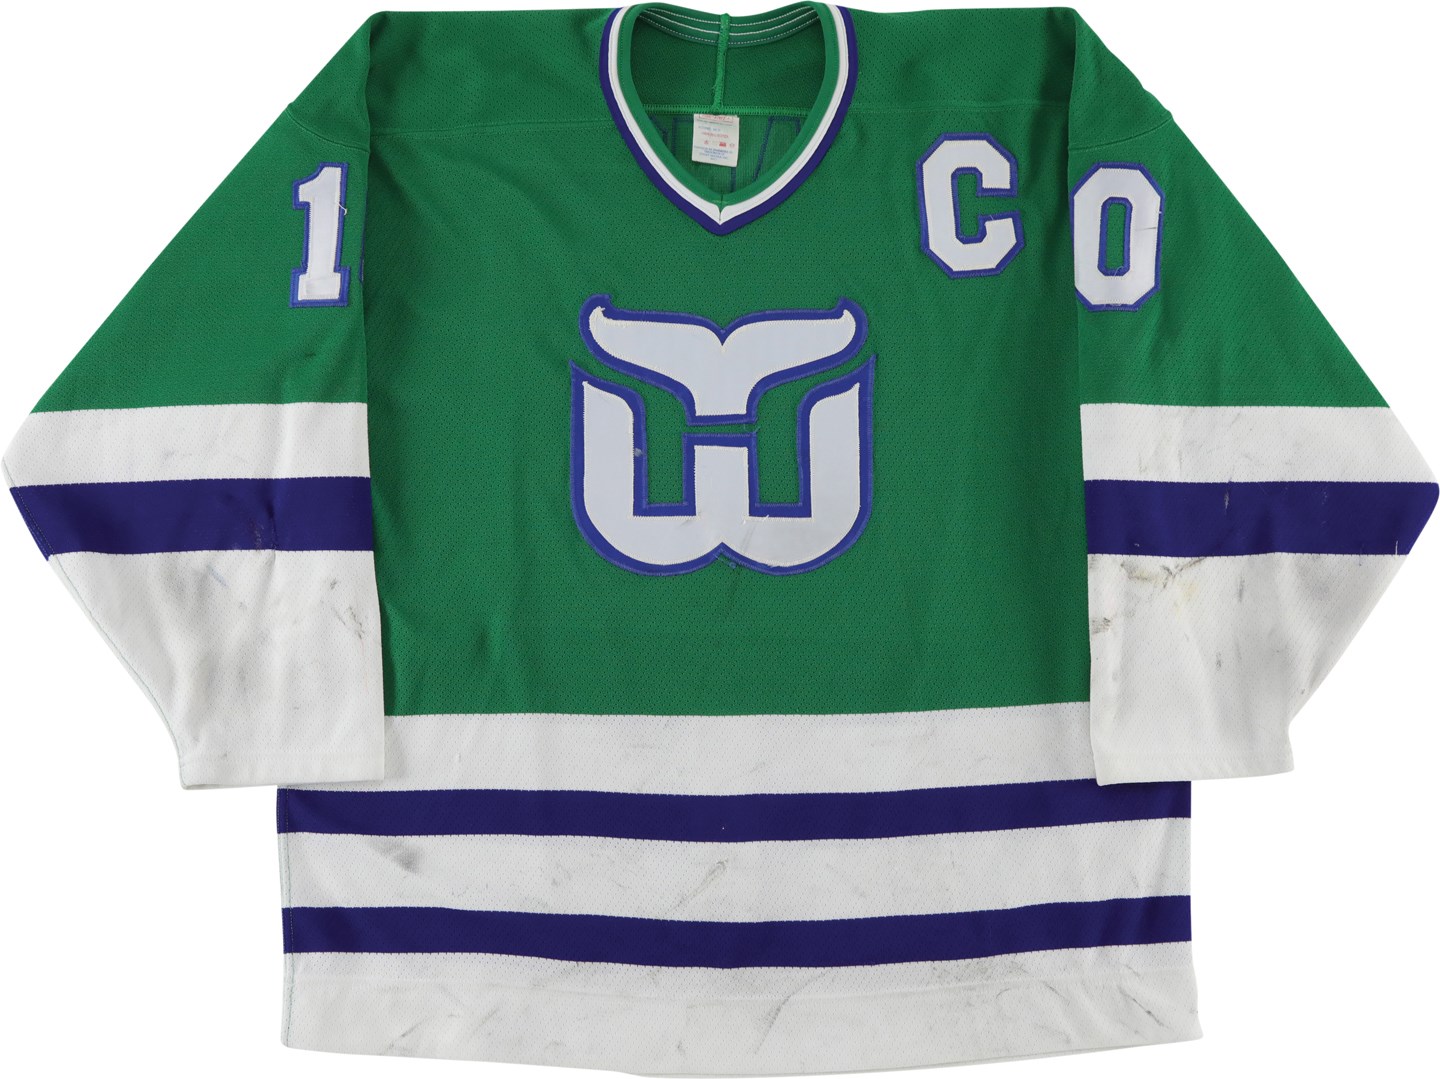 Hockey - 1988-89 Ron Francis Hartford Whalers Game Worn Jersey (Resolution Photo-Matched to 1989-90 Topps & O-Pee-Chee Cards)